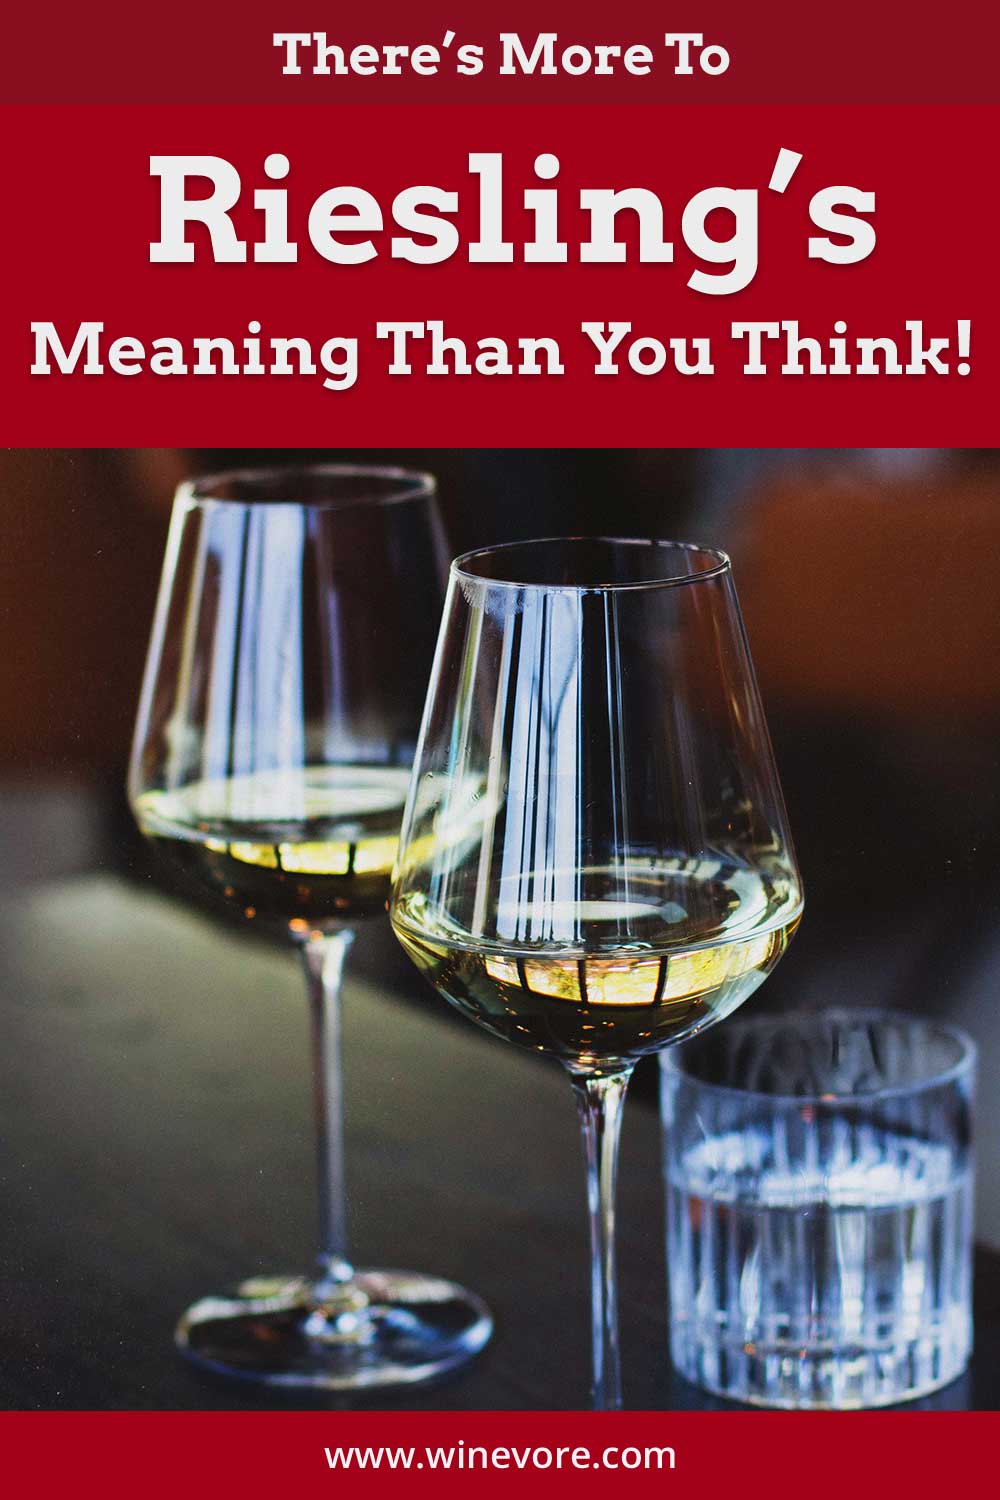 Two wine glasses near a shot glass - Riesling's Meaning